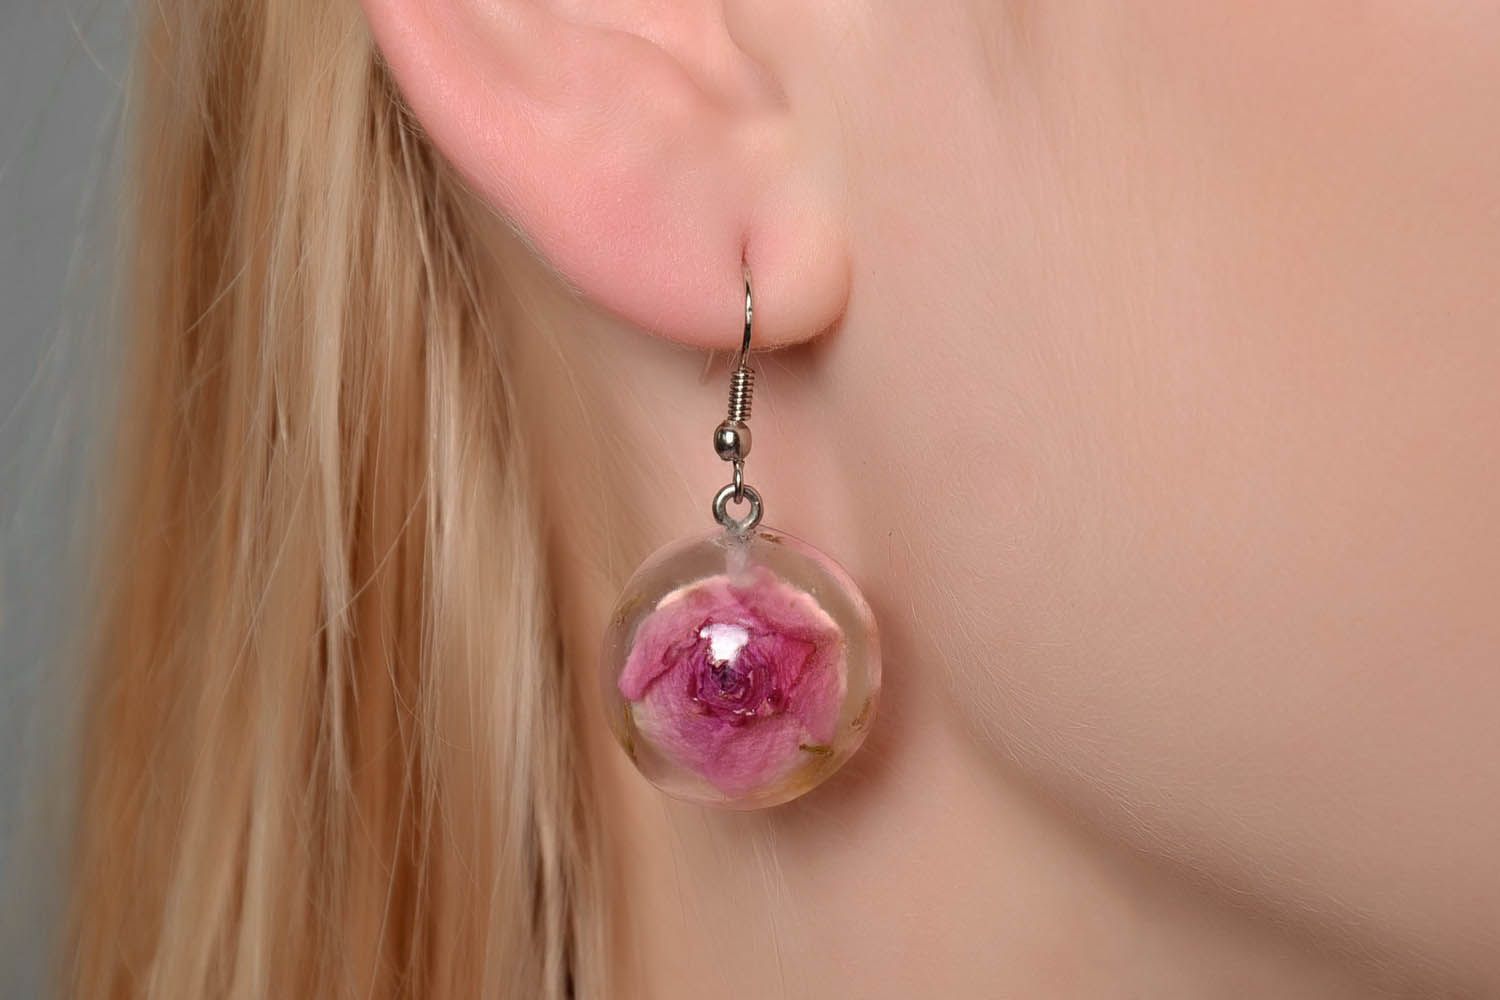 Earrings made of rose buds photo 4